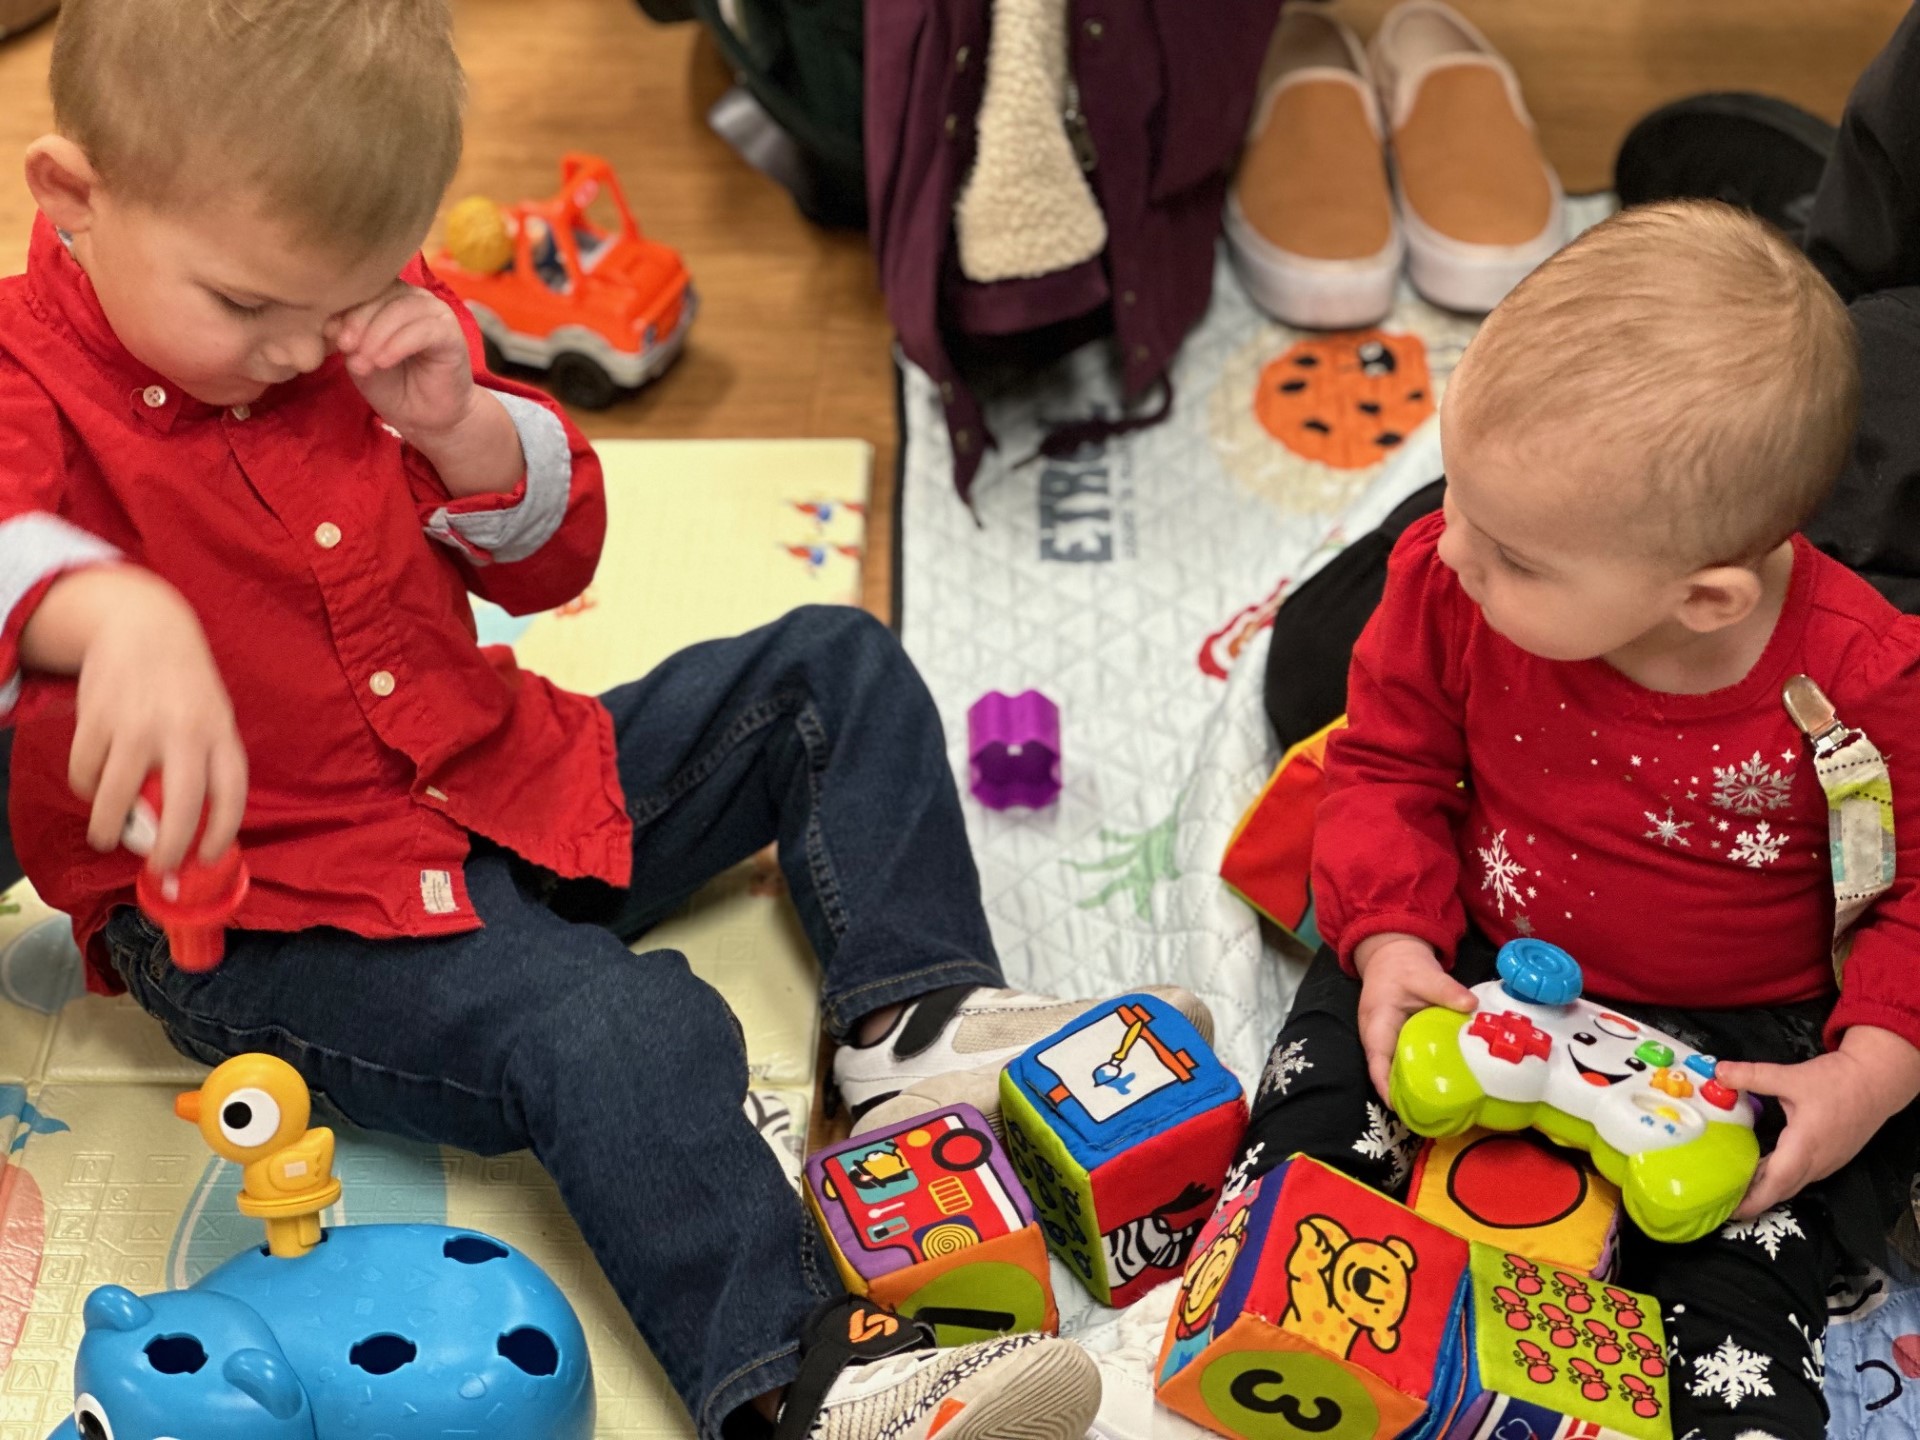 Two children wearing red shirts playing during story time.